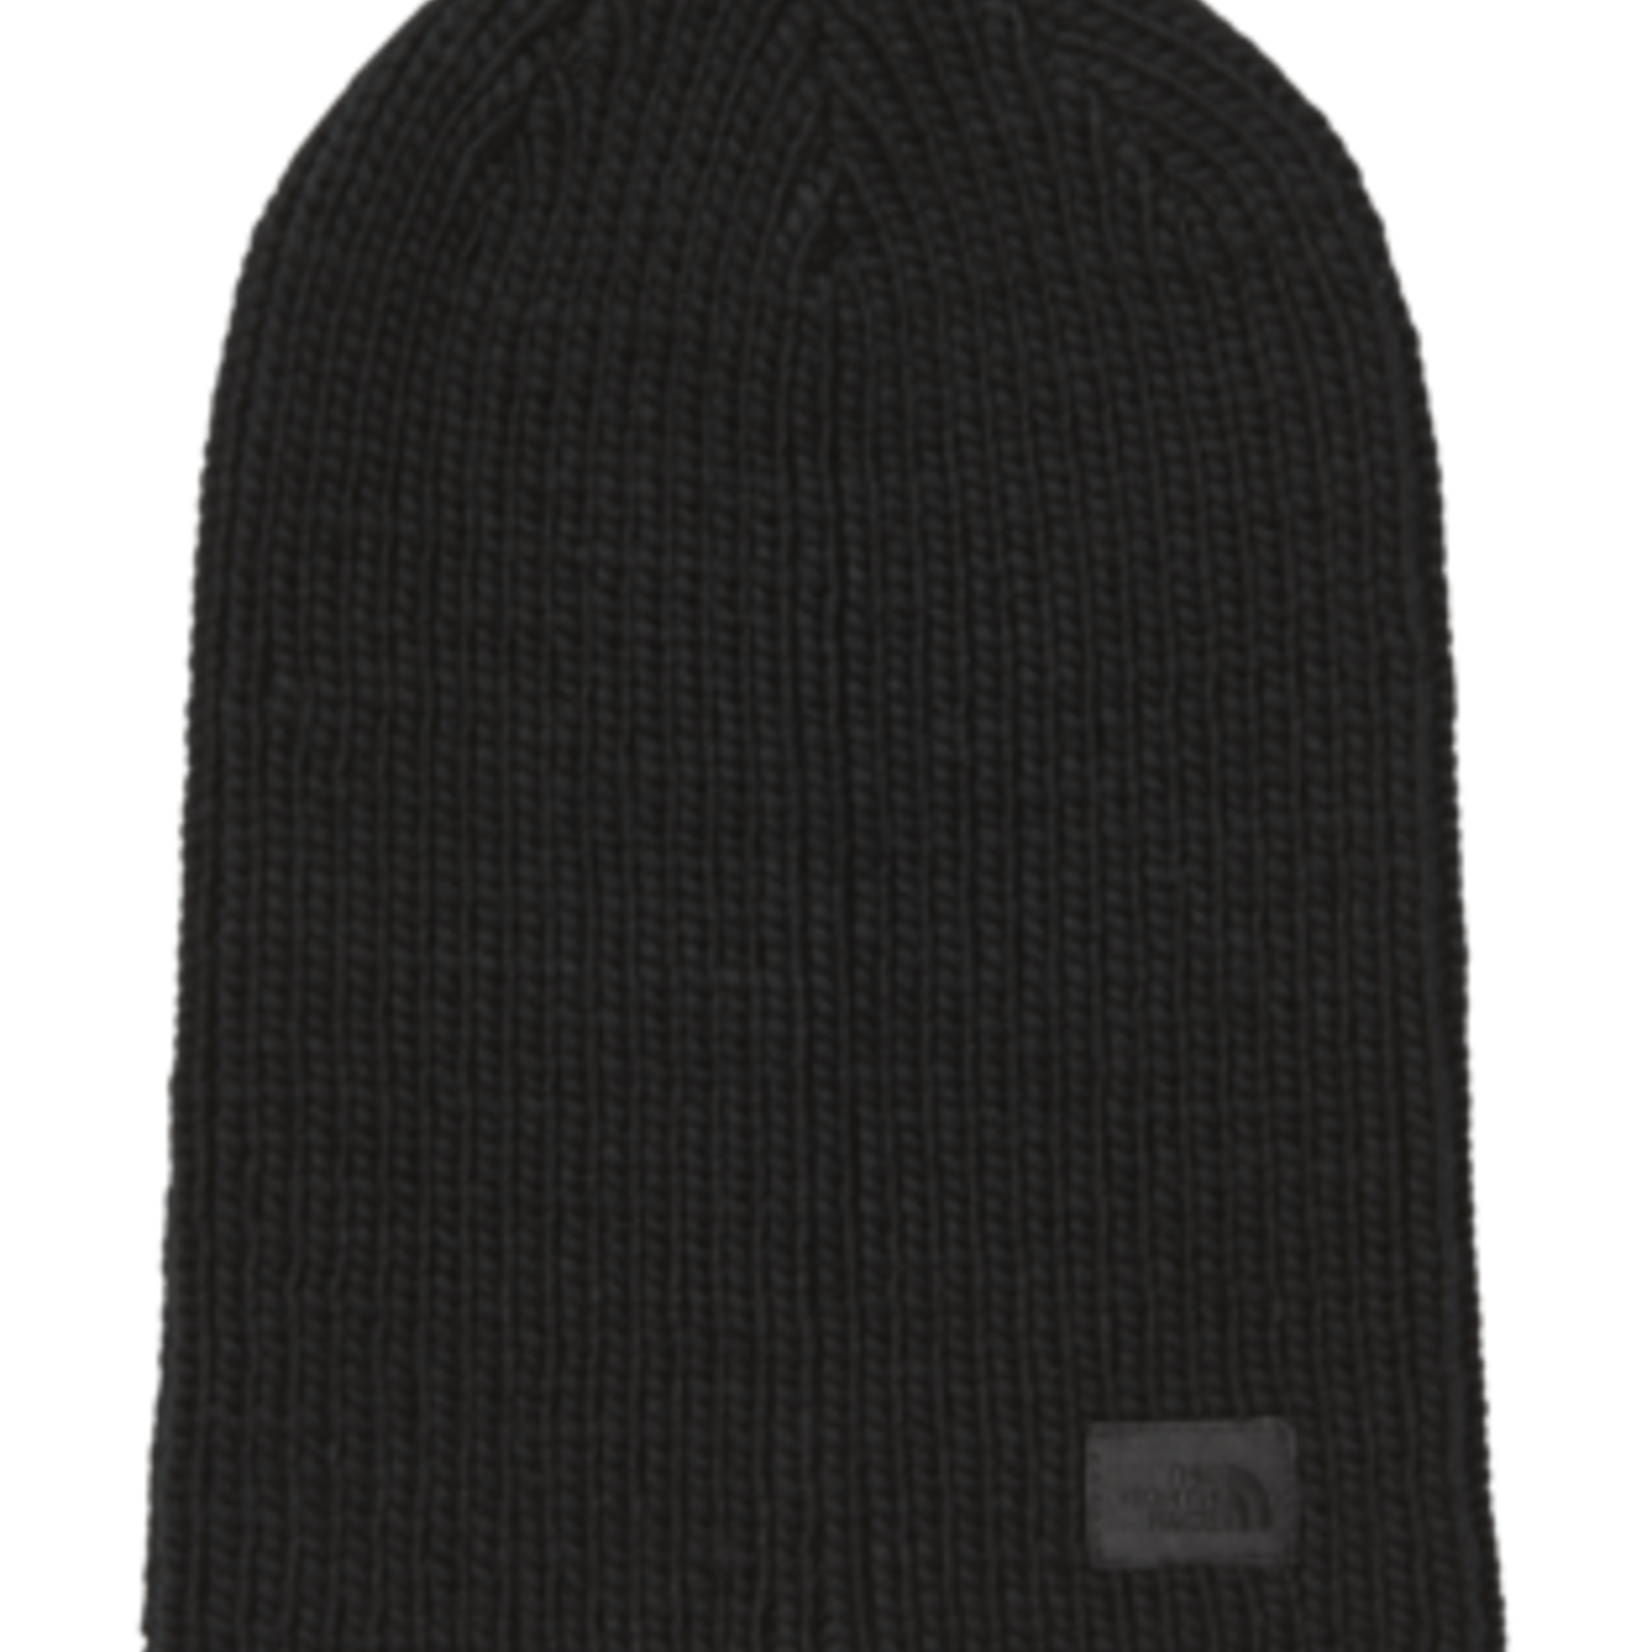 The North Face The North Face Toque, Shinsky Beanie, Ladies, OS